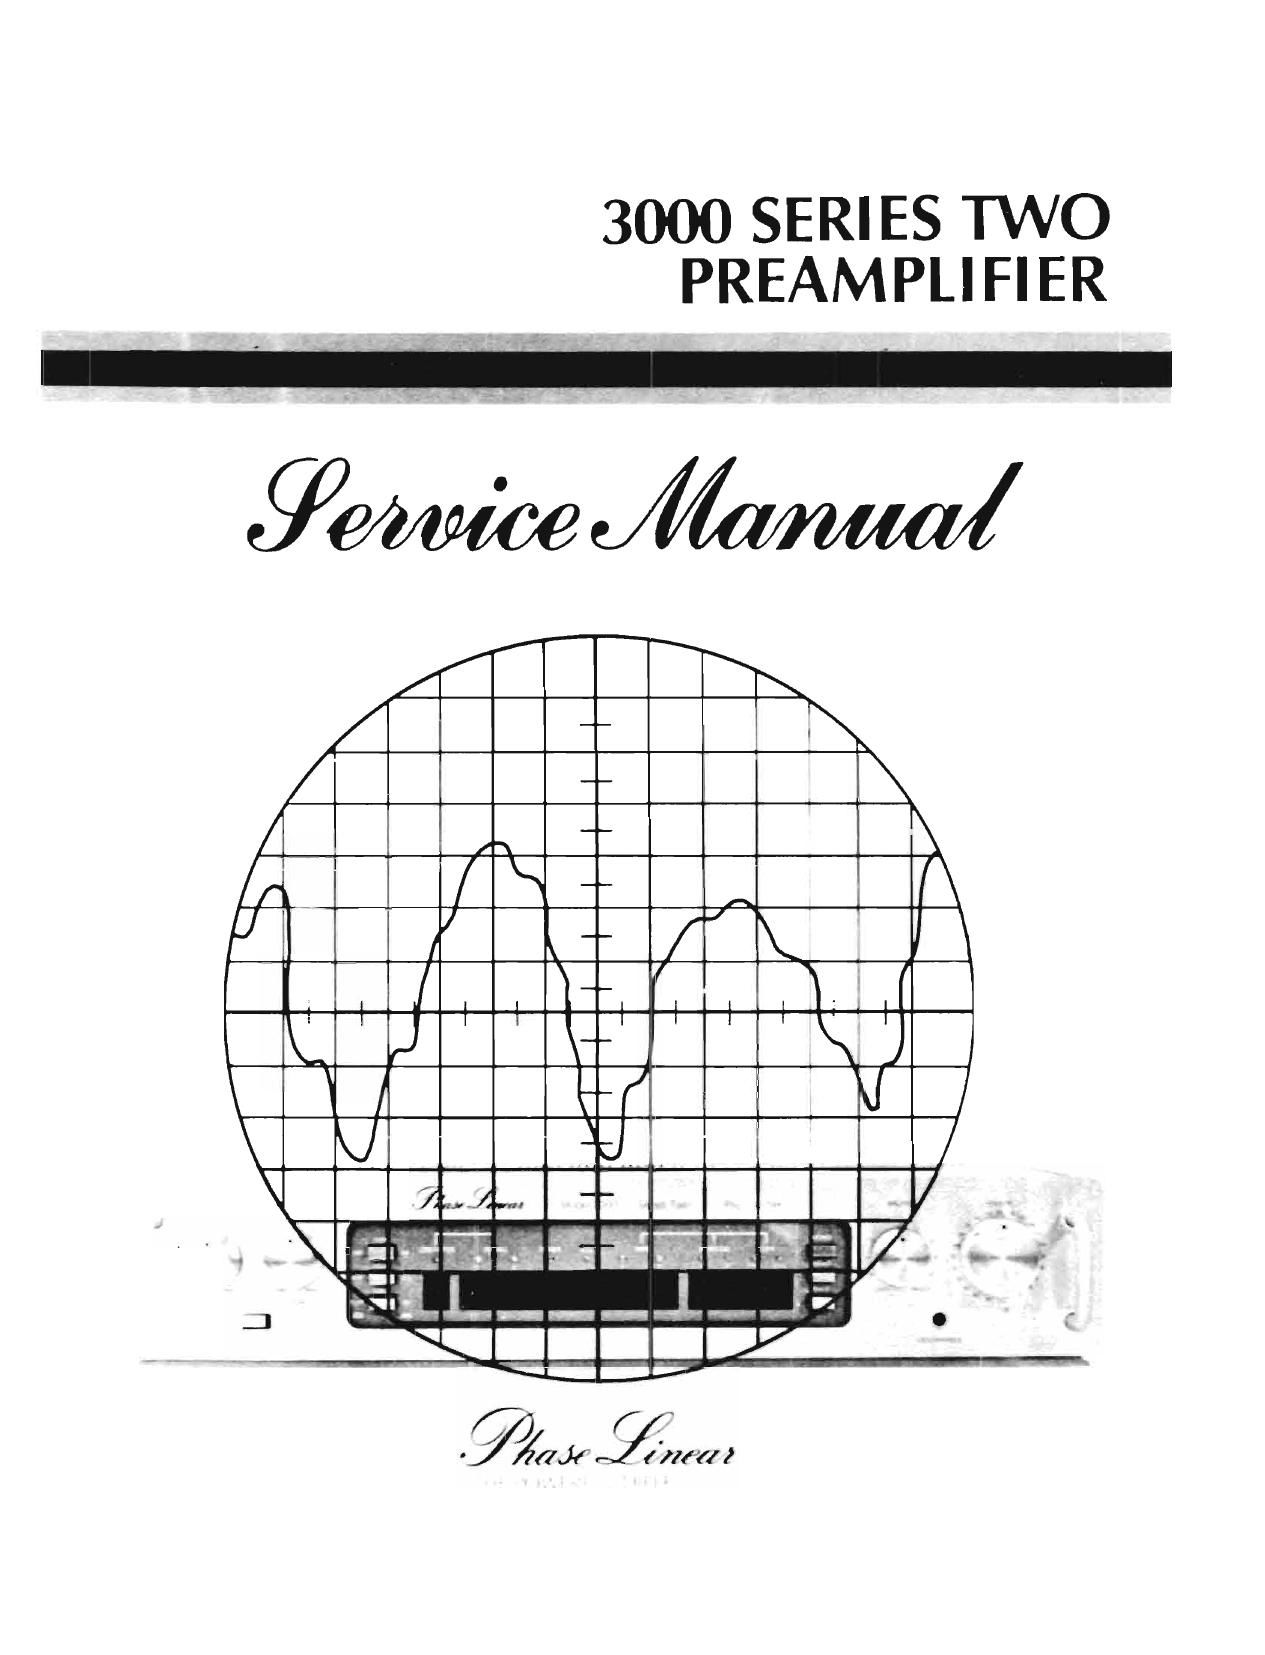 Phase Linear 3000 Series Two Service Manual